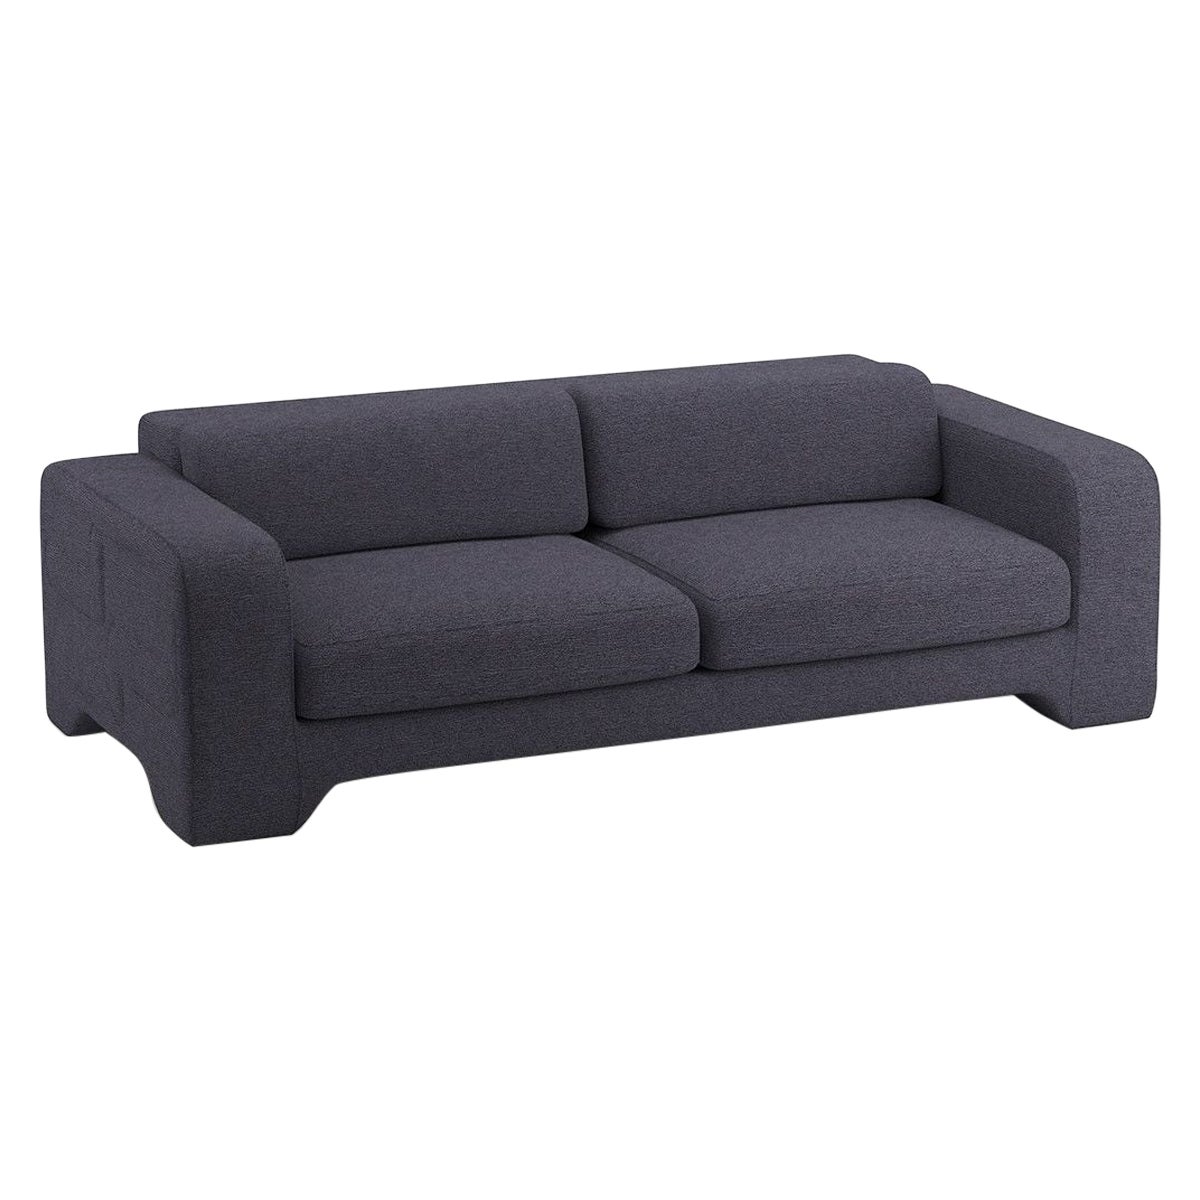 Popus Editions Giovanna 3 Seater Sofa in Anthracite Megeve Fabric Knit Effect For Sale